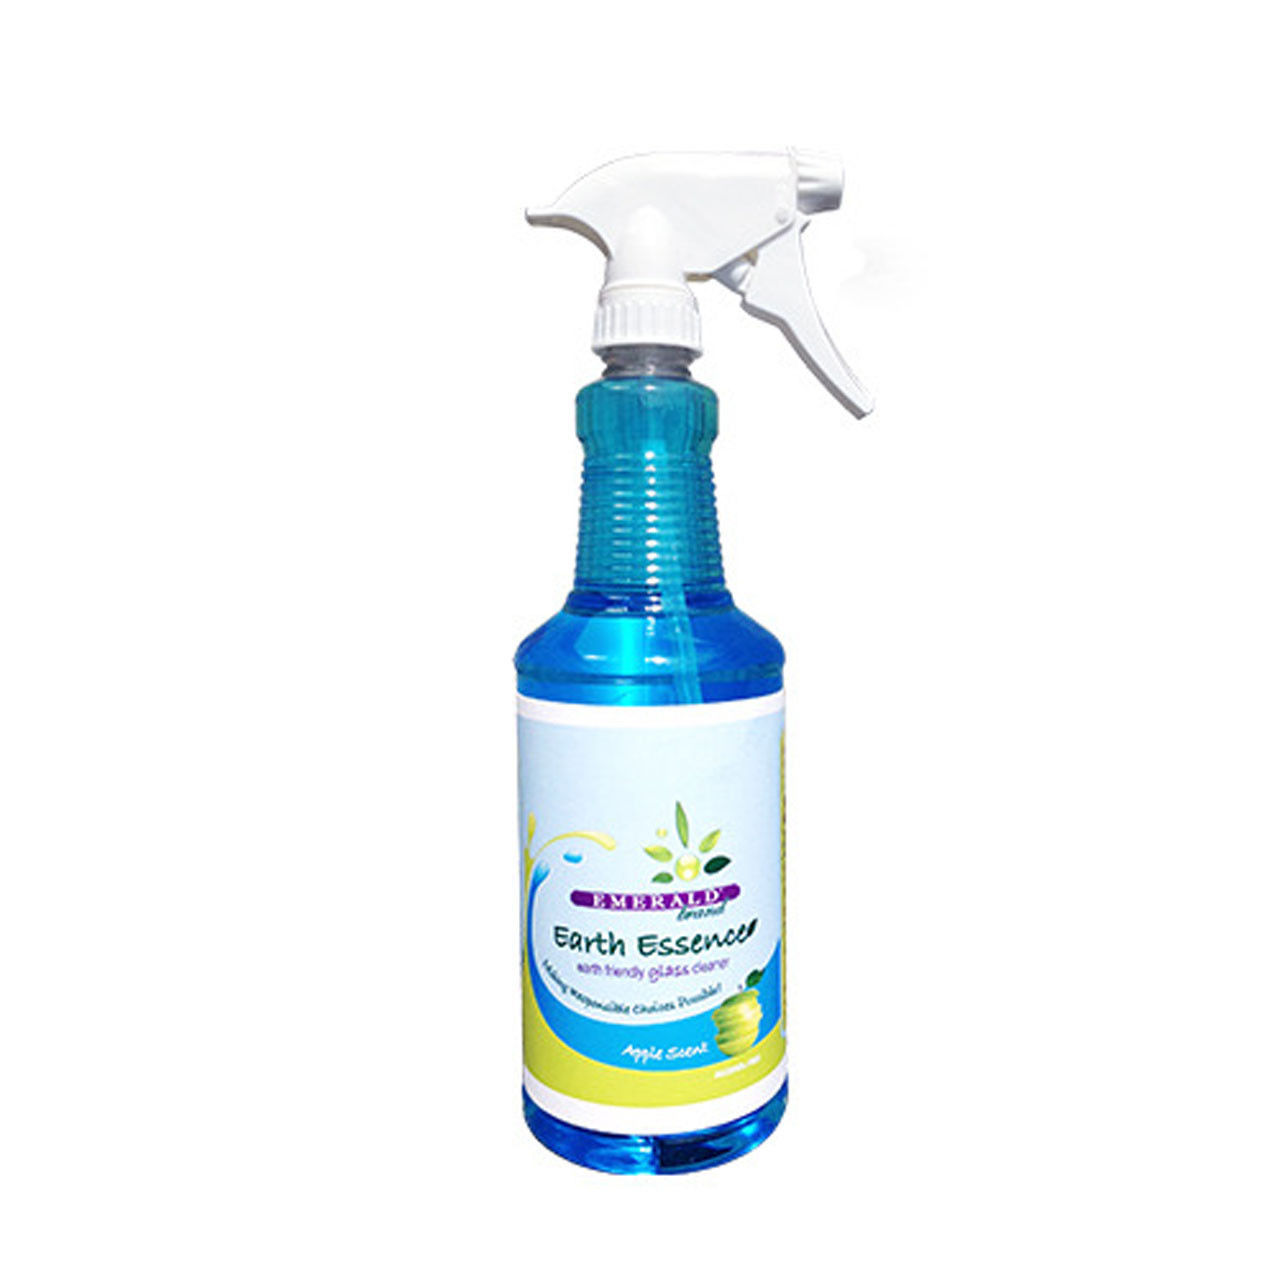 Is the Emerald Earth Essence Glass Cleaner biodegradable?